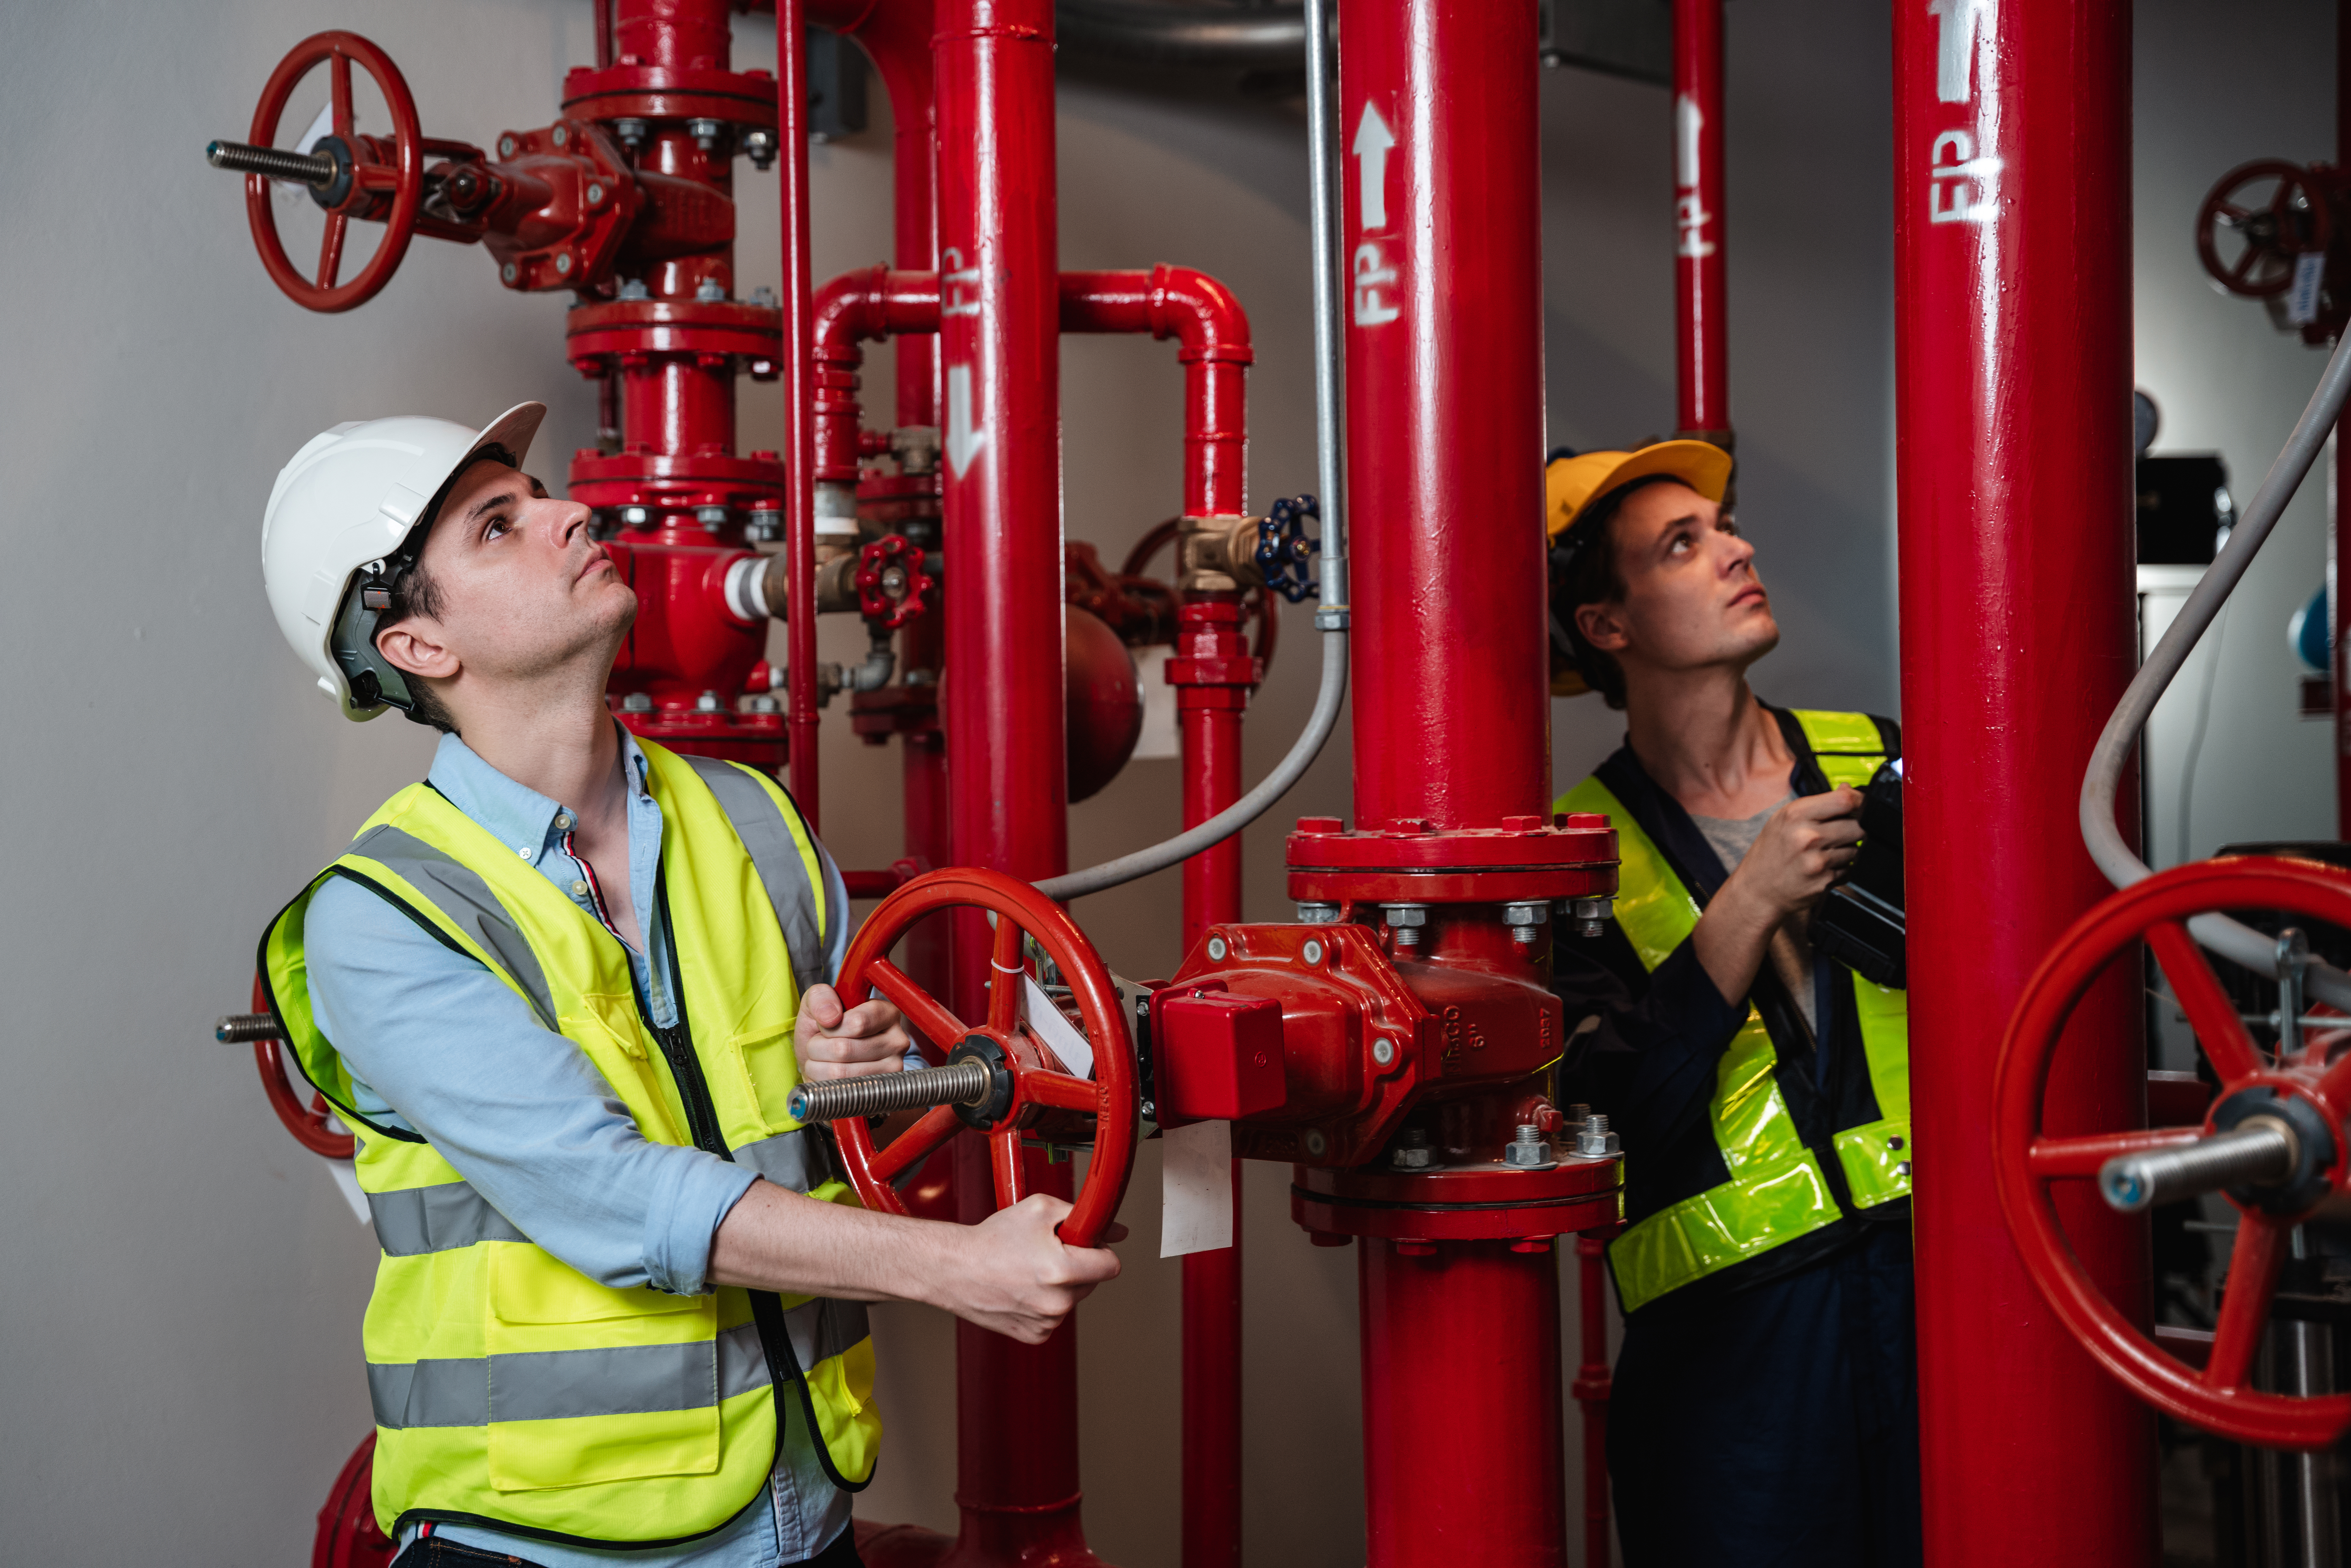 Engineers inspecting the inside plumbing and water valves of an industrial facility